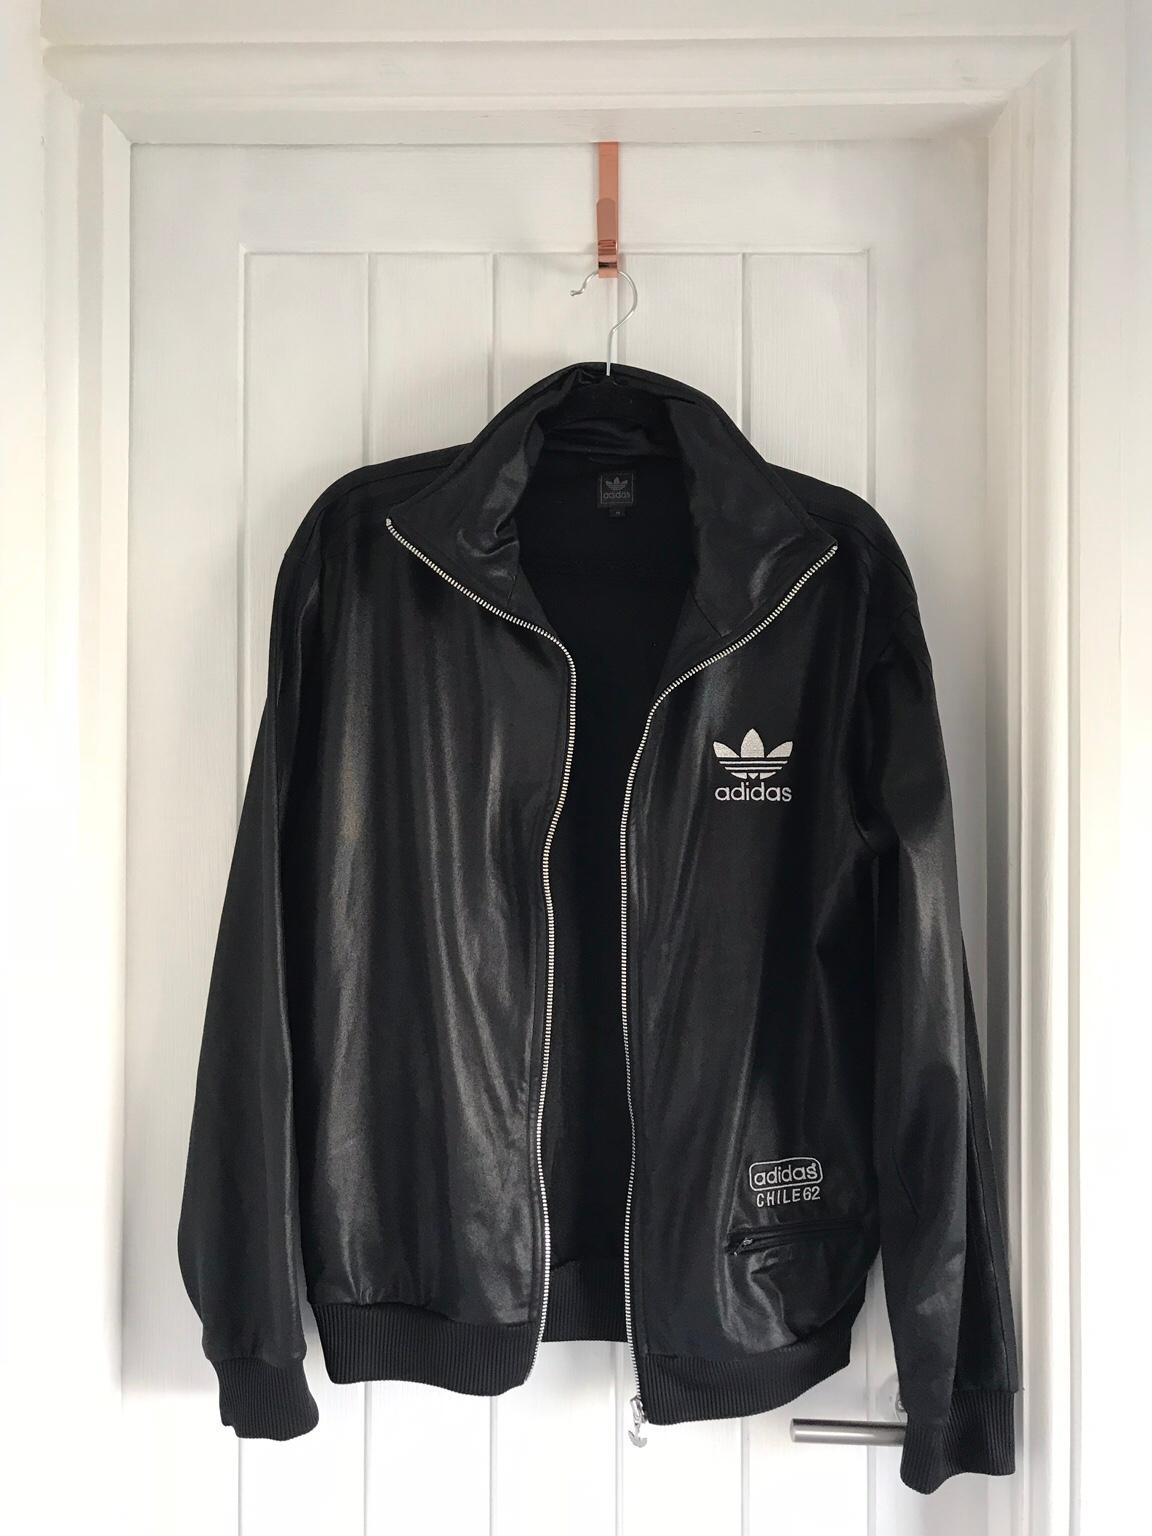 Adidas Chile 62 Jacket Medium in B43 Walsall for £20.00 for sale | Shpock